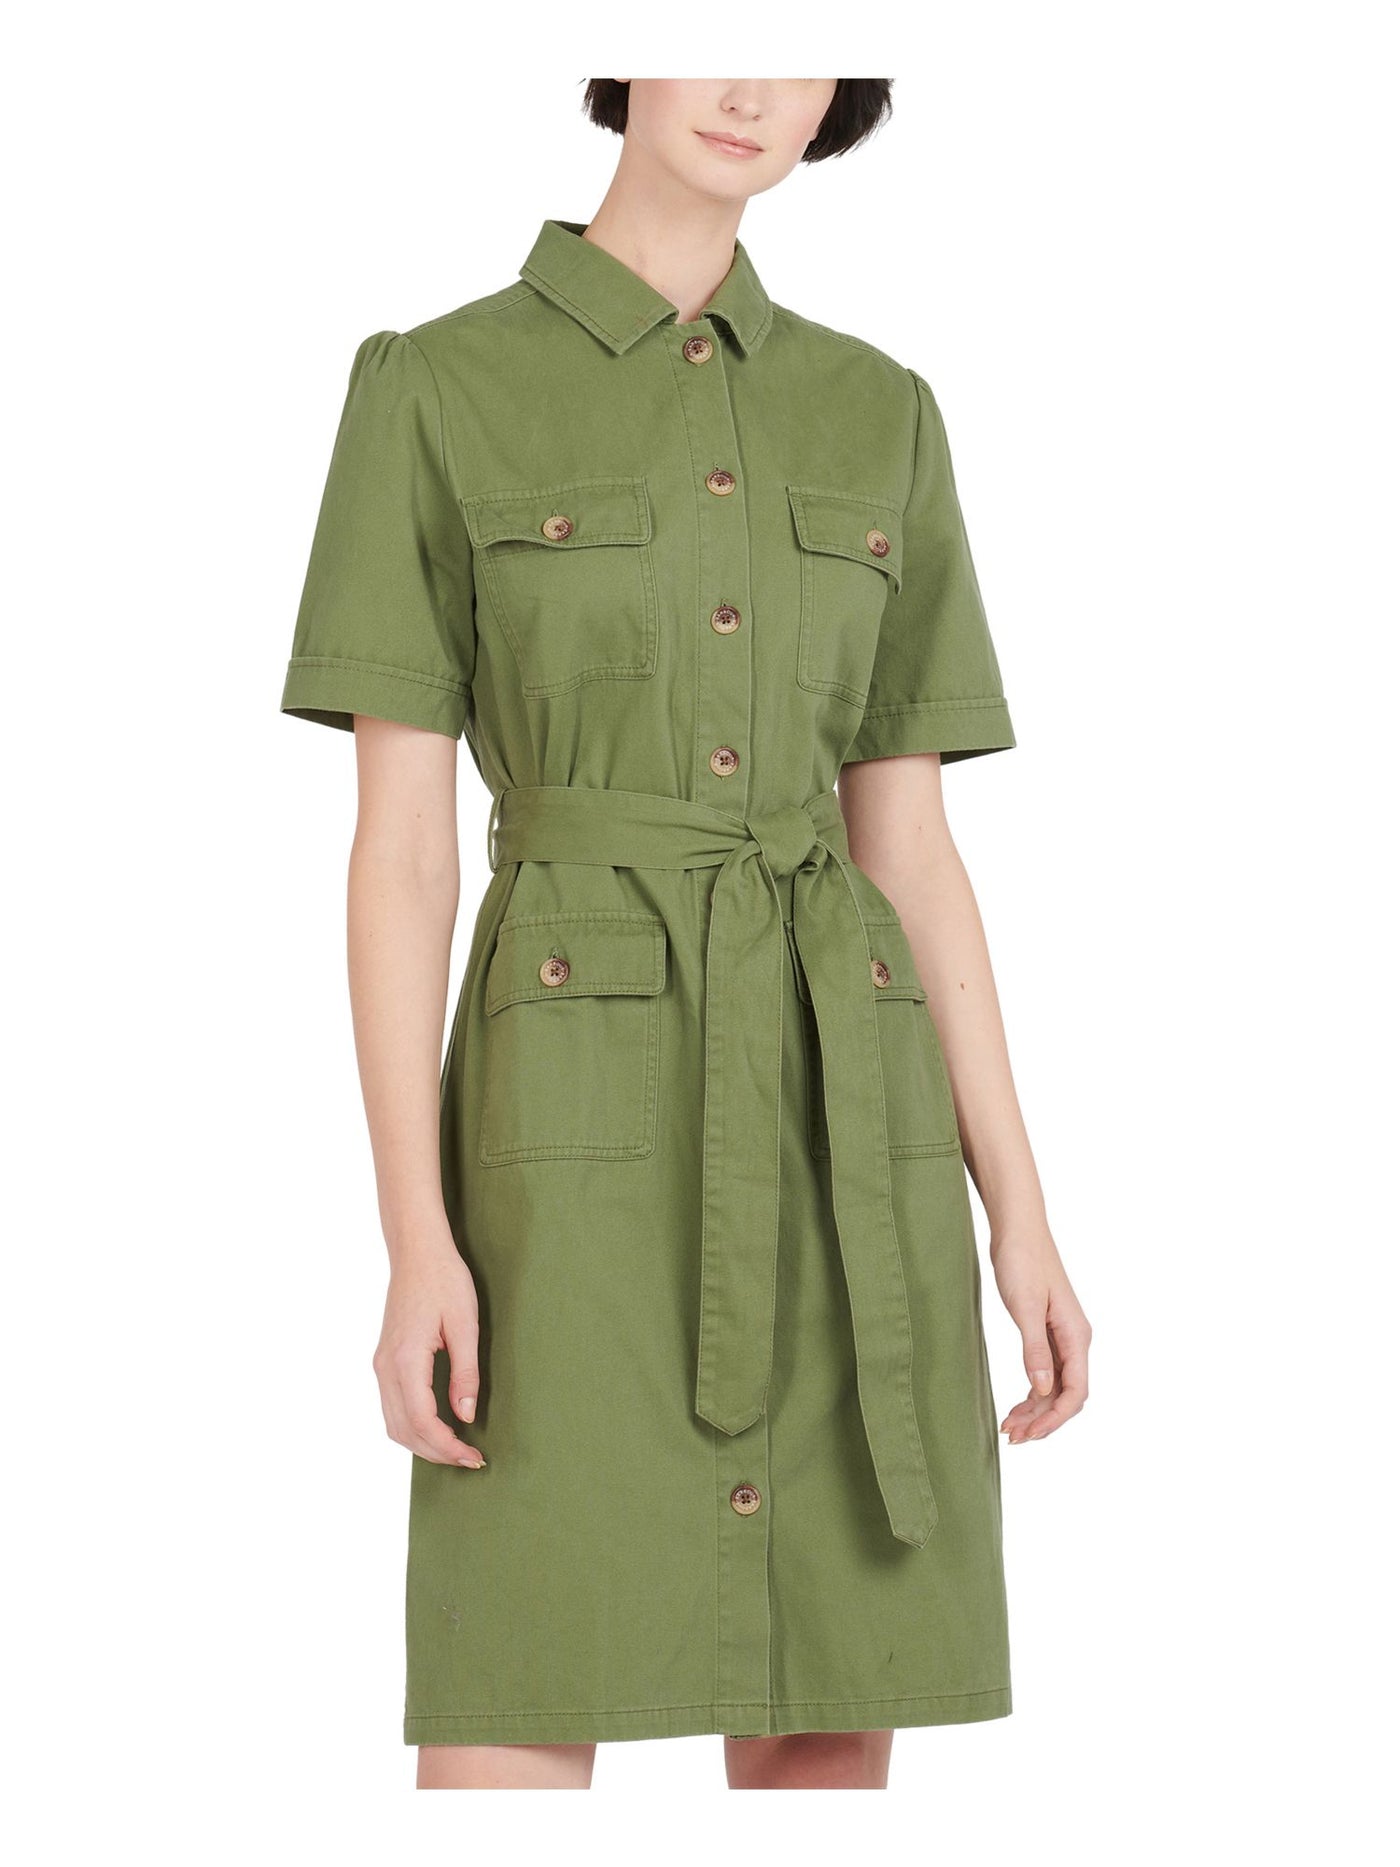 BARBOUR Womens Green Tie Pocketed Buttoned Utility Short Sleeve Point Collar Above The Knee Shirt Dress 8